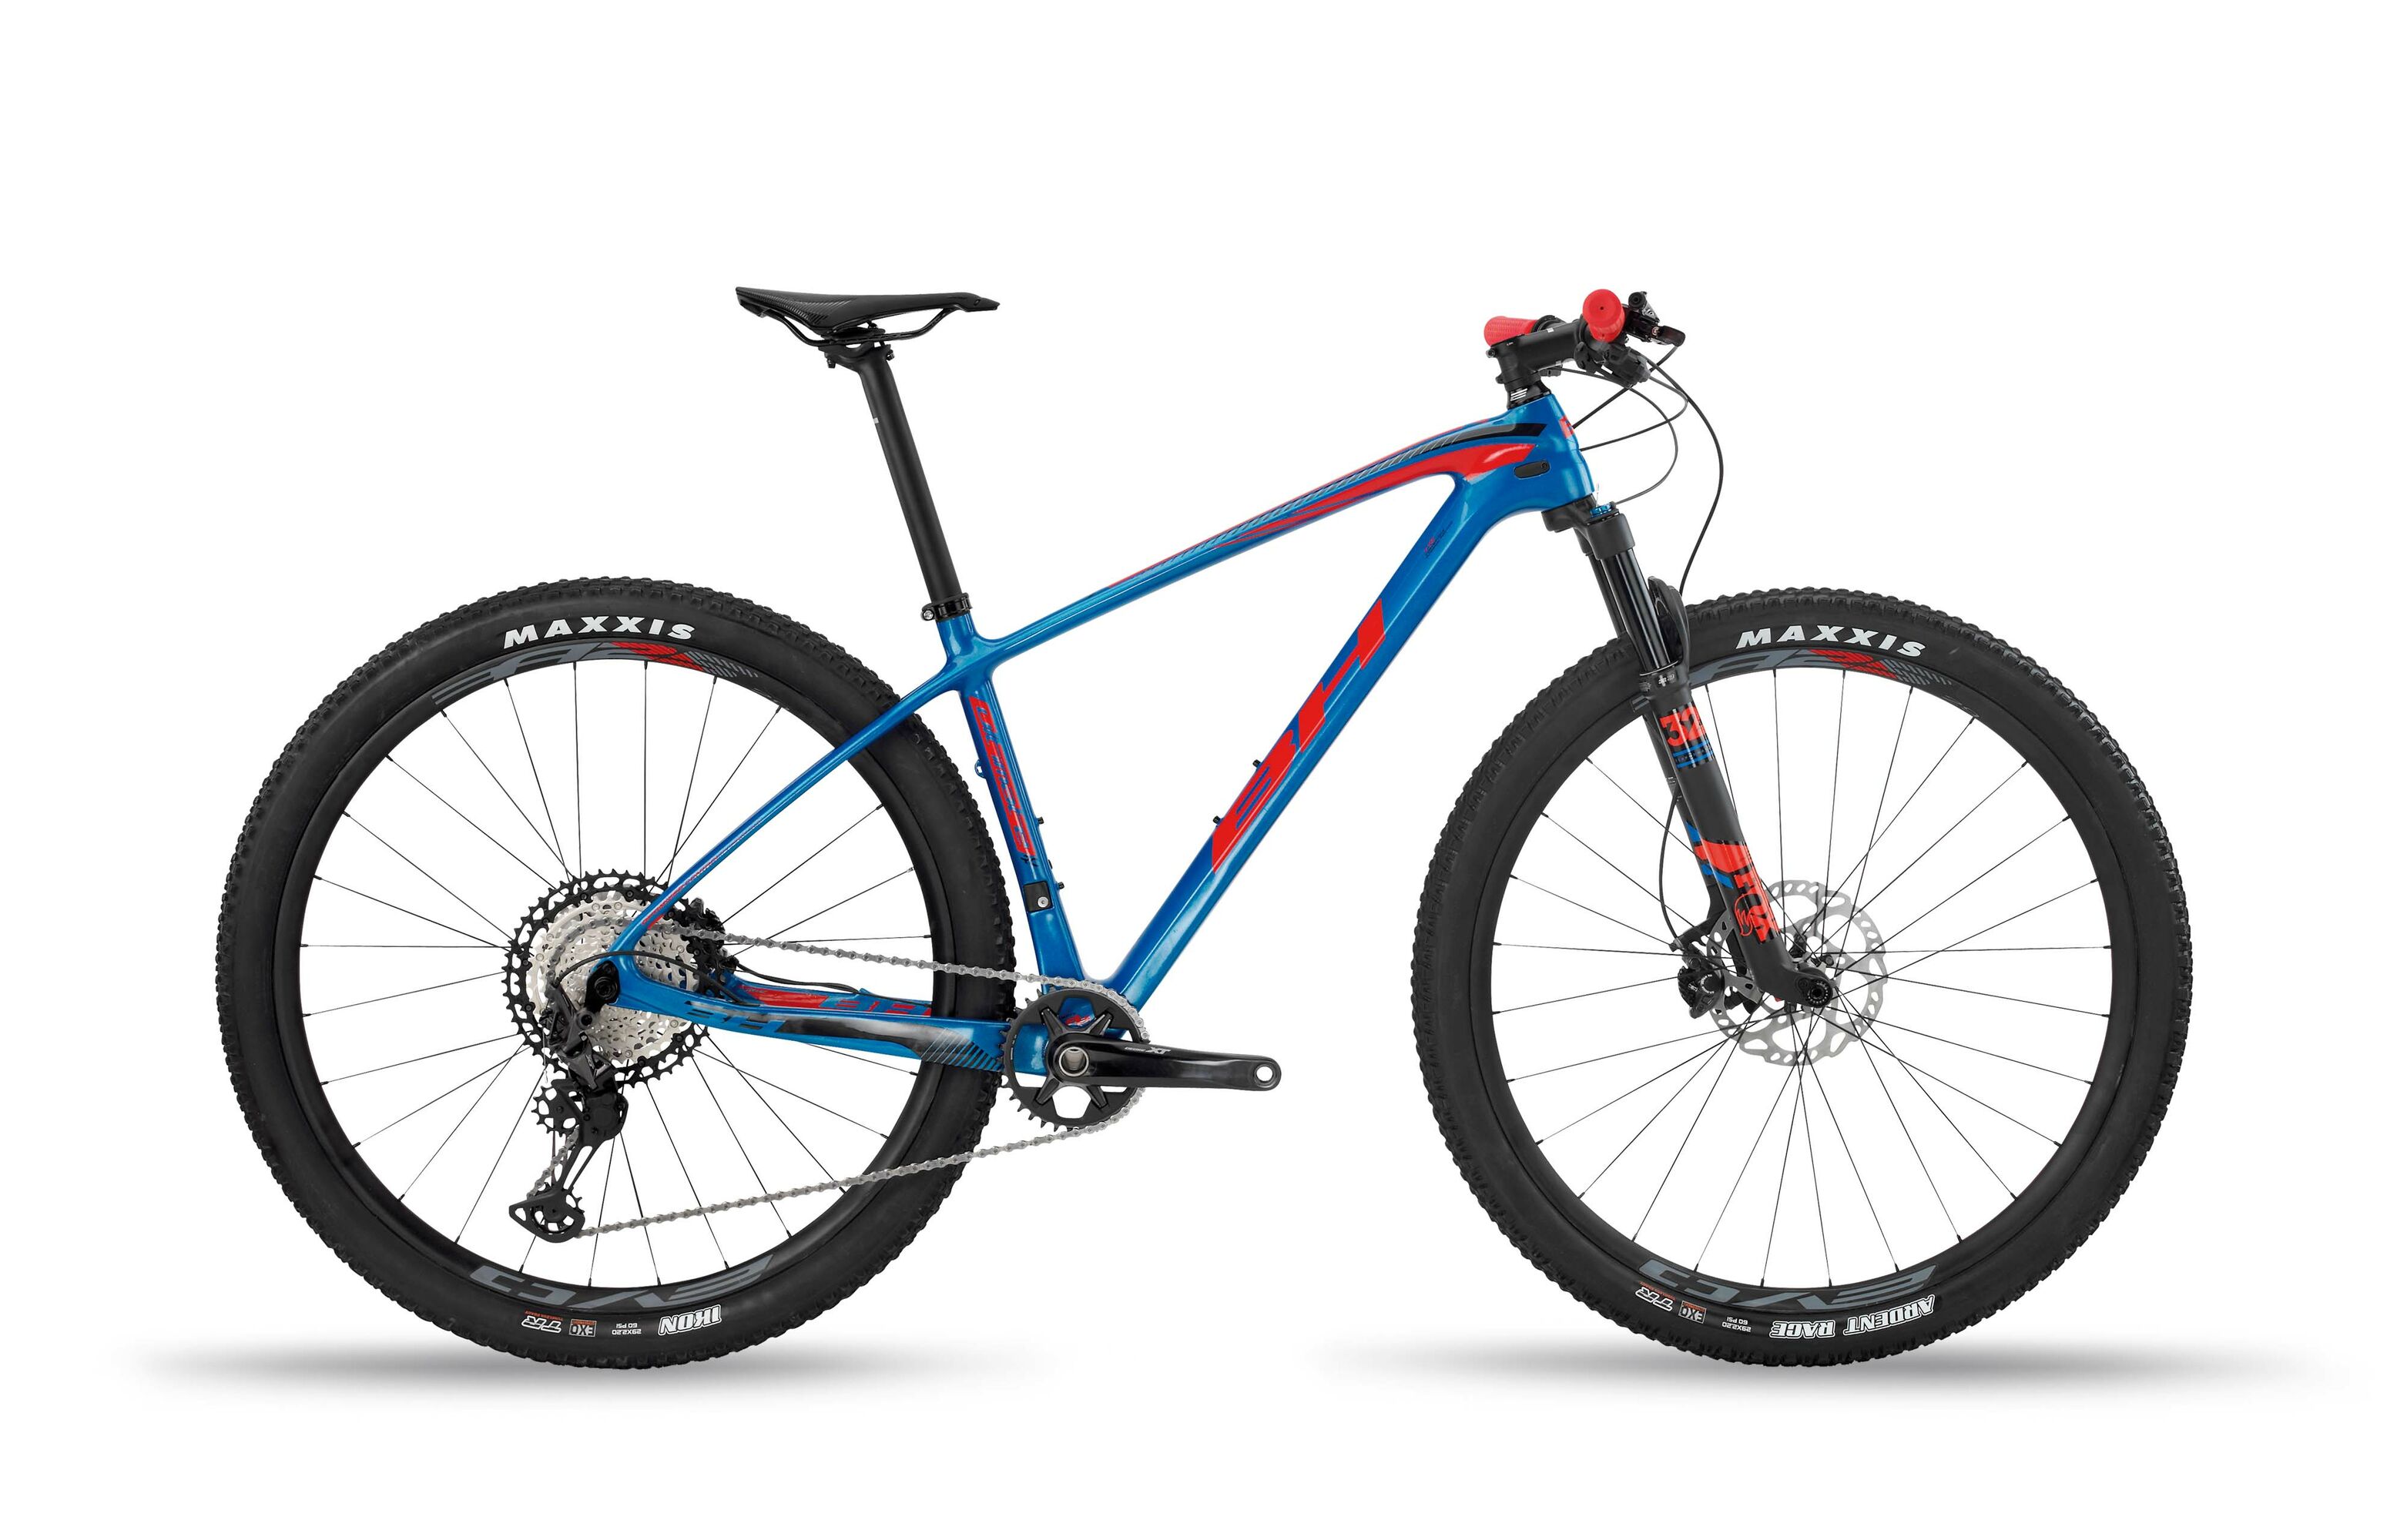 ULTIMATE RC 7.5 - BH Bikes